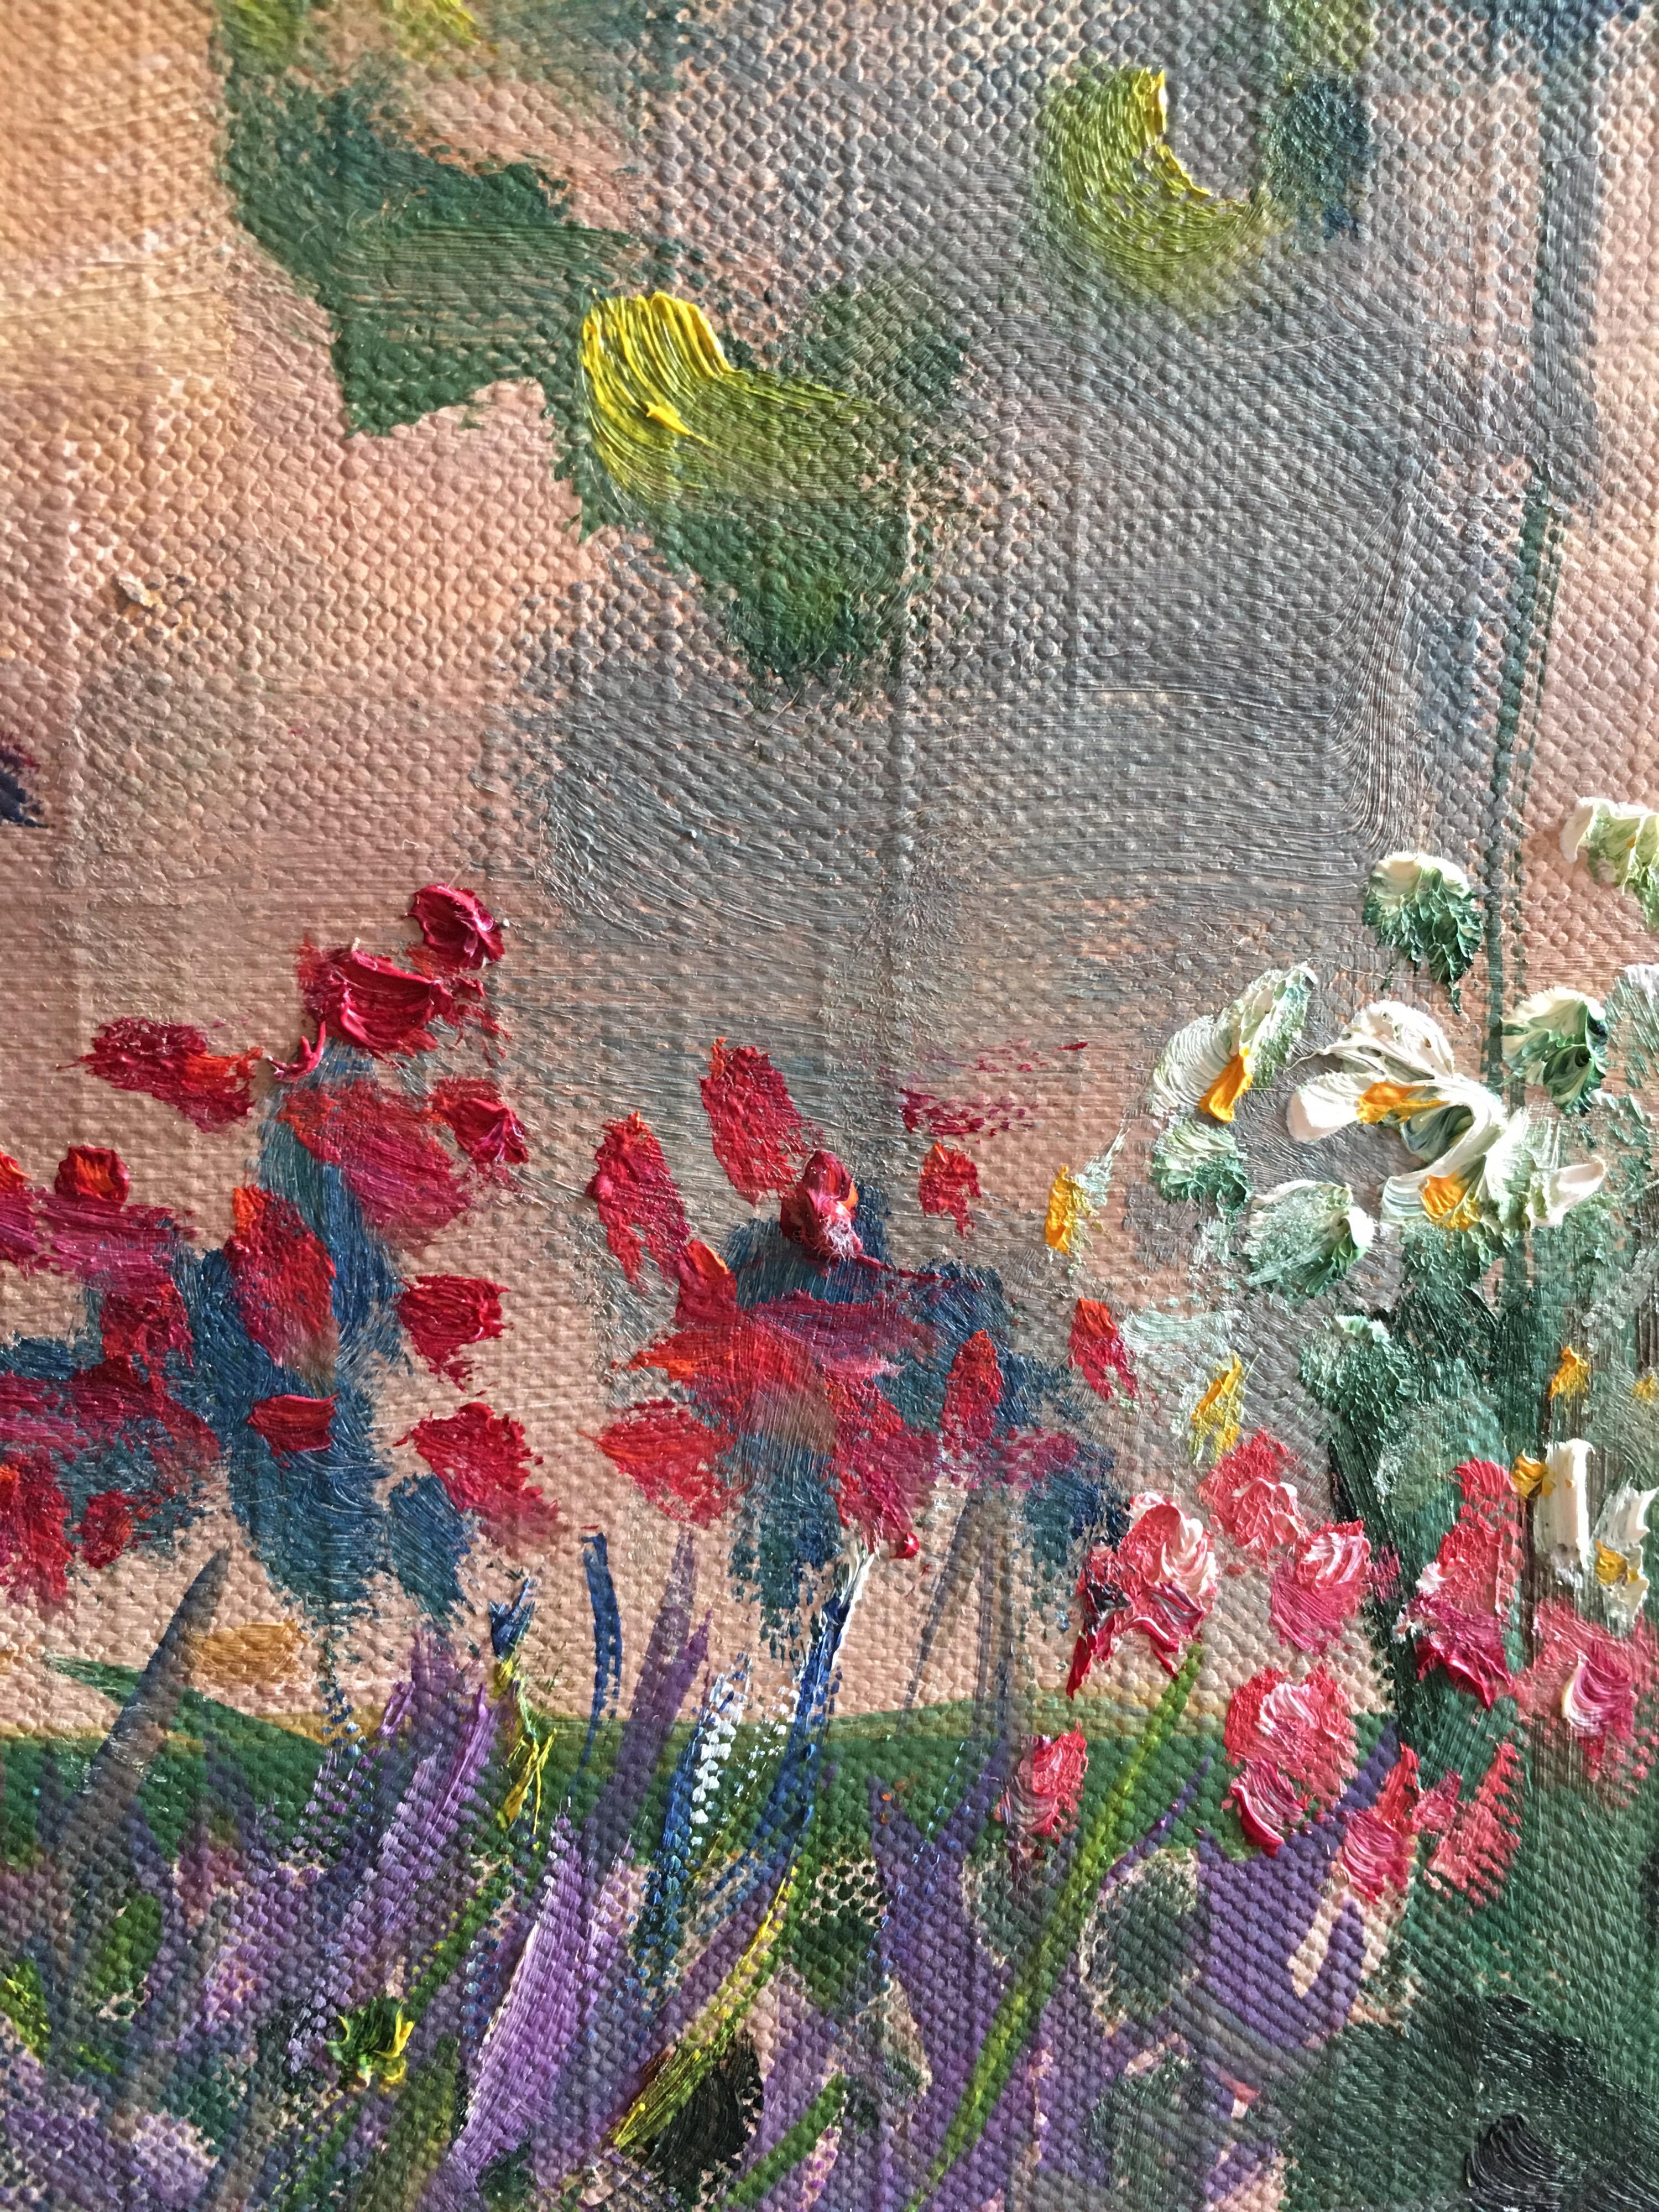 Colourful Spring Garden, French Original Oil Painting
French School 20th Century
Oil painting on thin card/paper, unframed
Card size: 9 x 15 inches

Delightful French Impressionist oil painting, depicting the joyful front garden of a hidden little